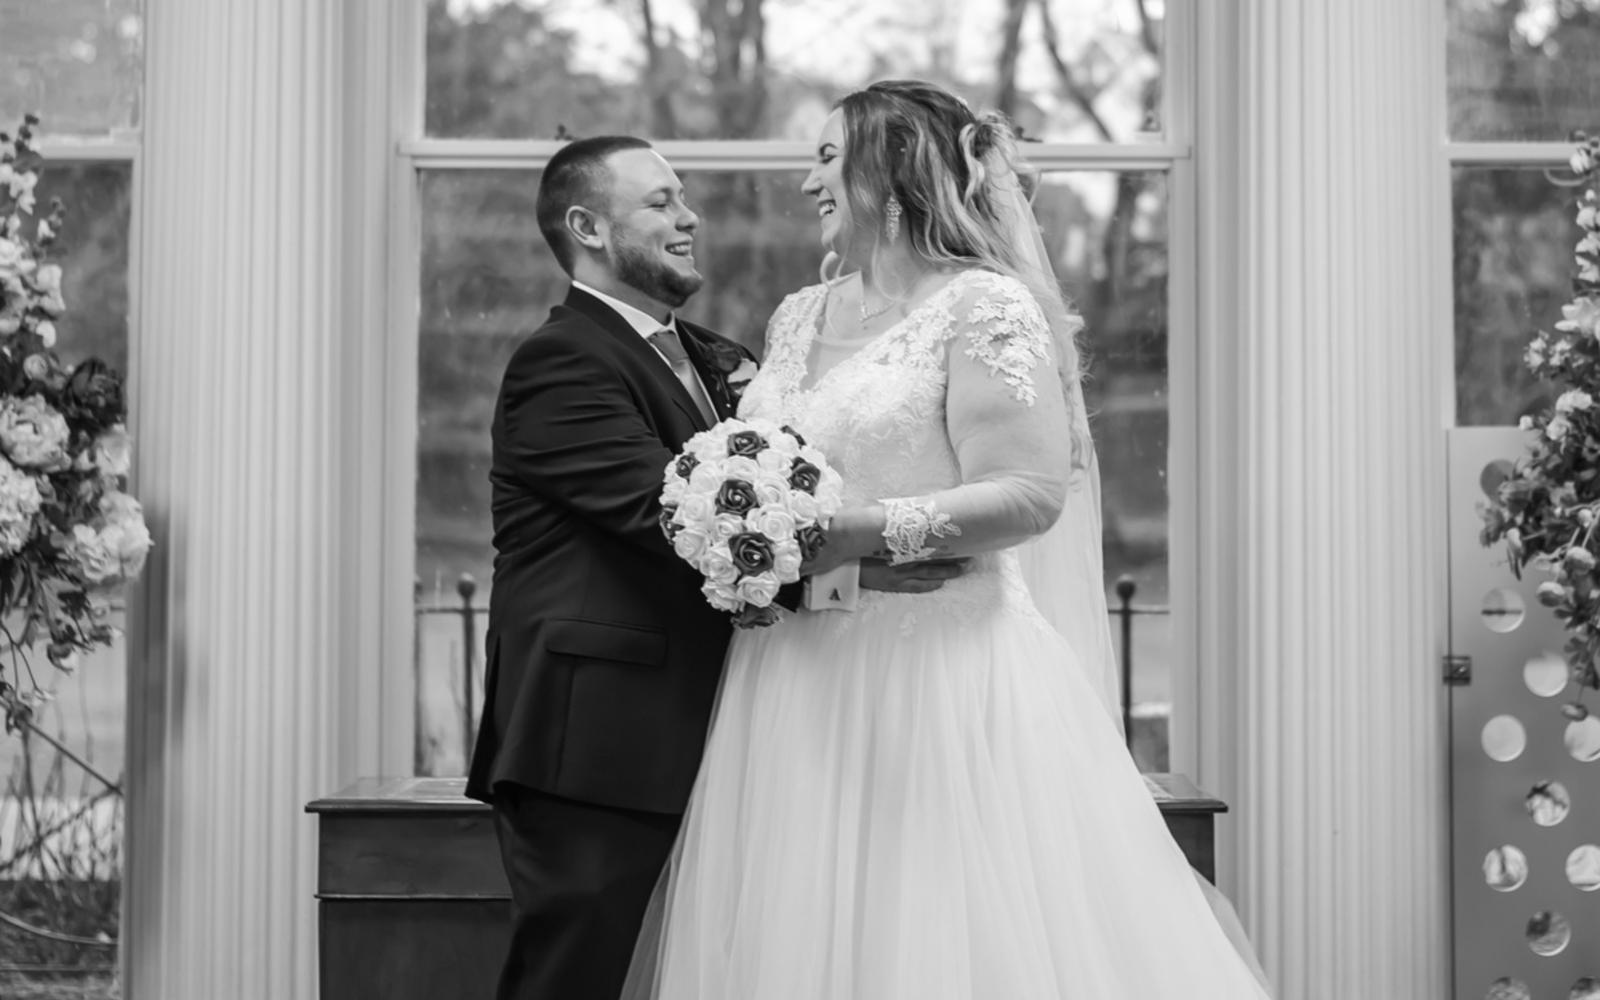 Real Wedding Whitewed Directory approved photographer Strike A Pose Photography Grasmere House Hotel Salisbury couple portrait black white